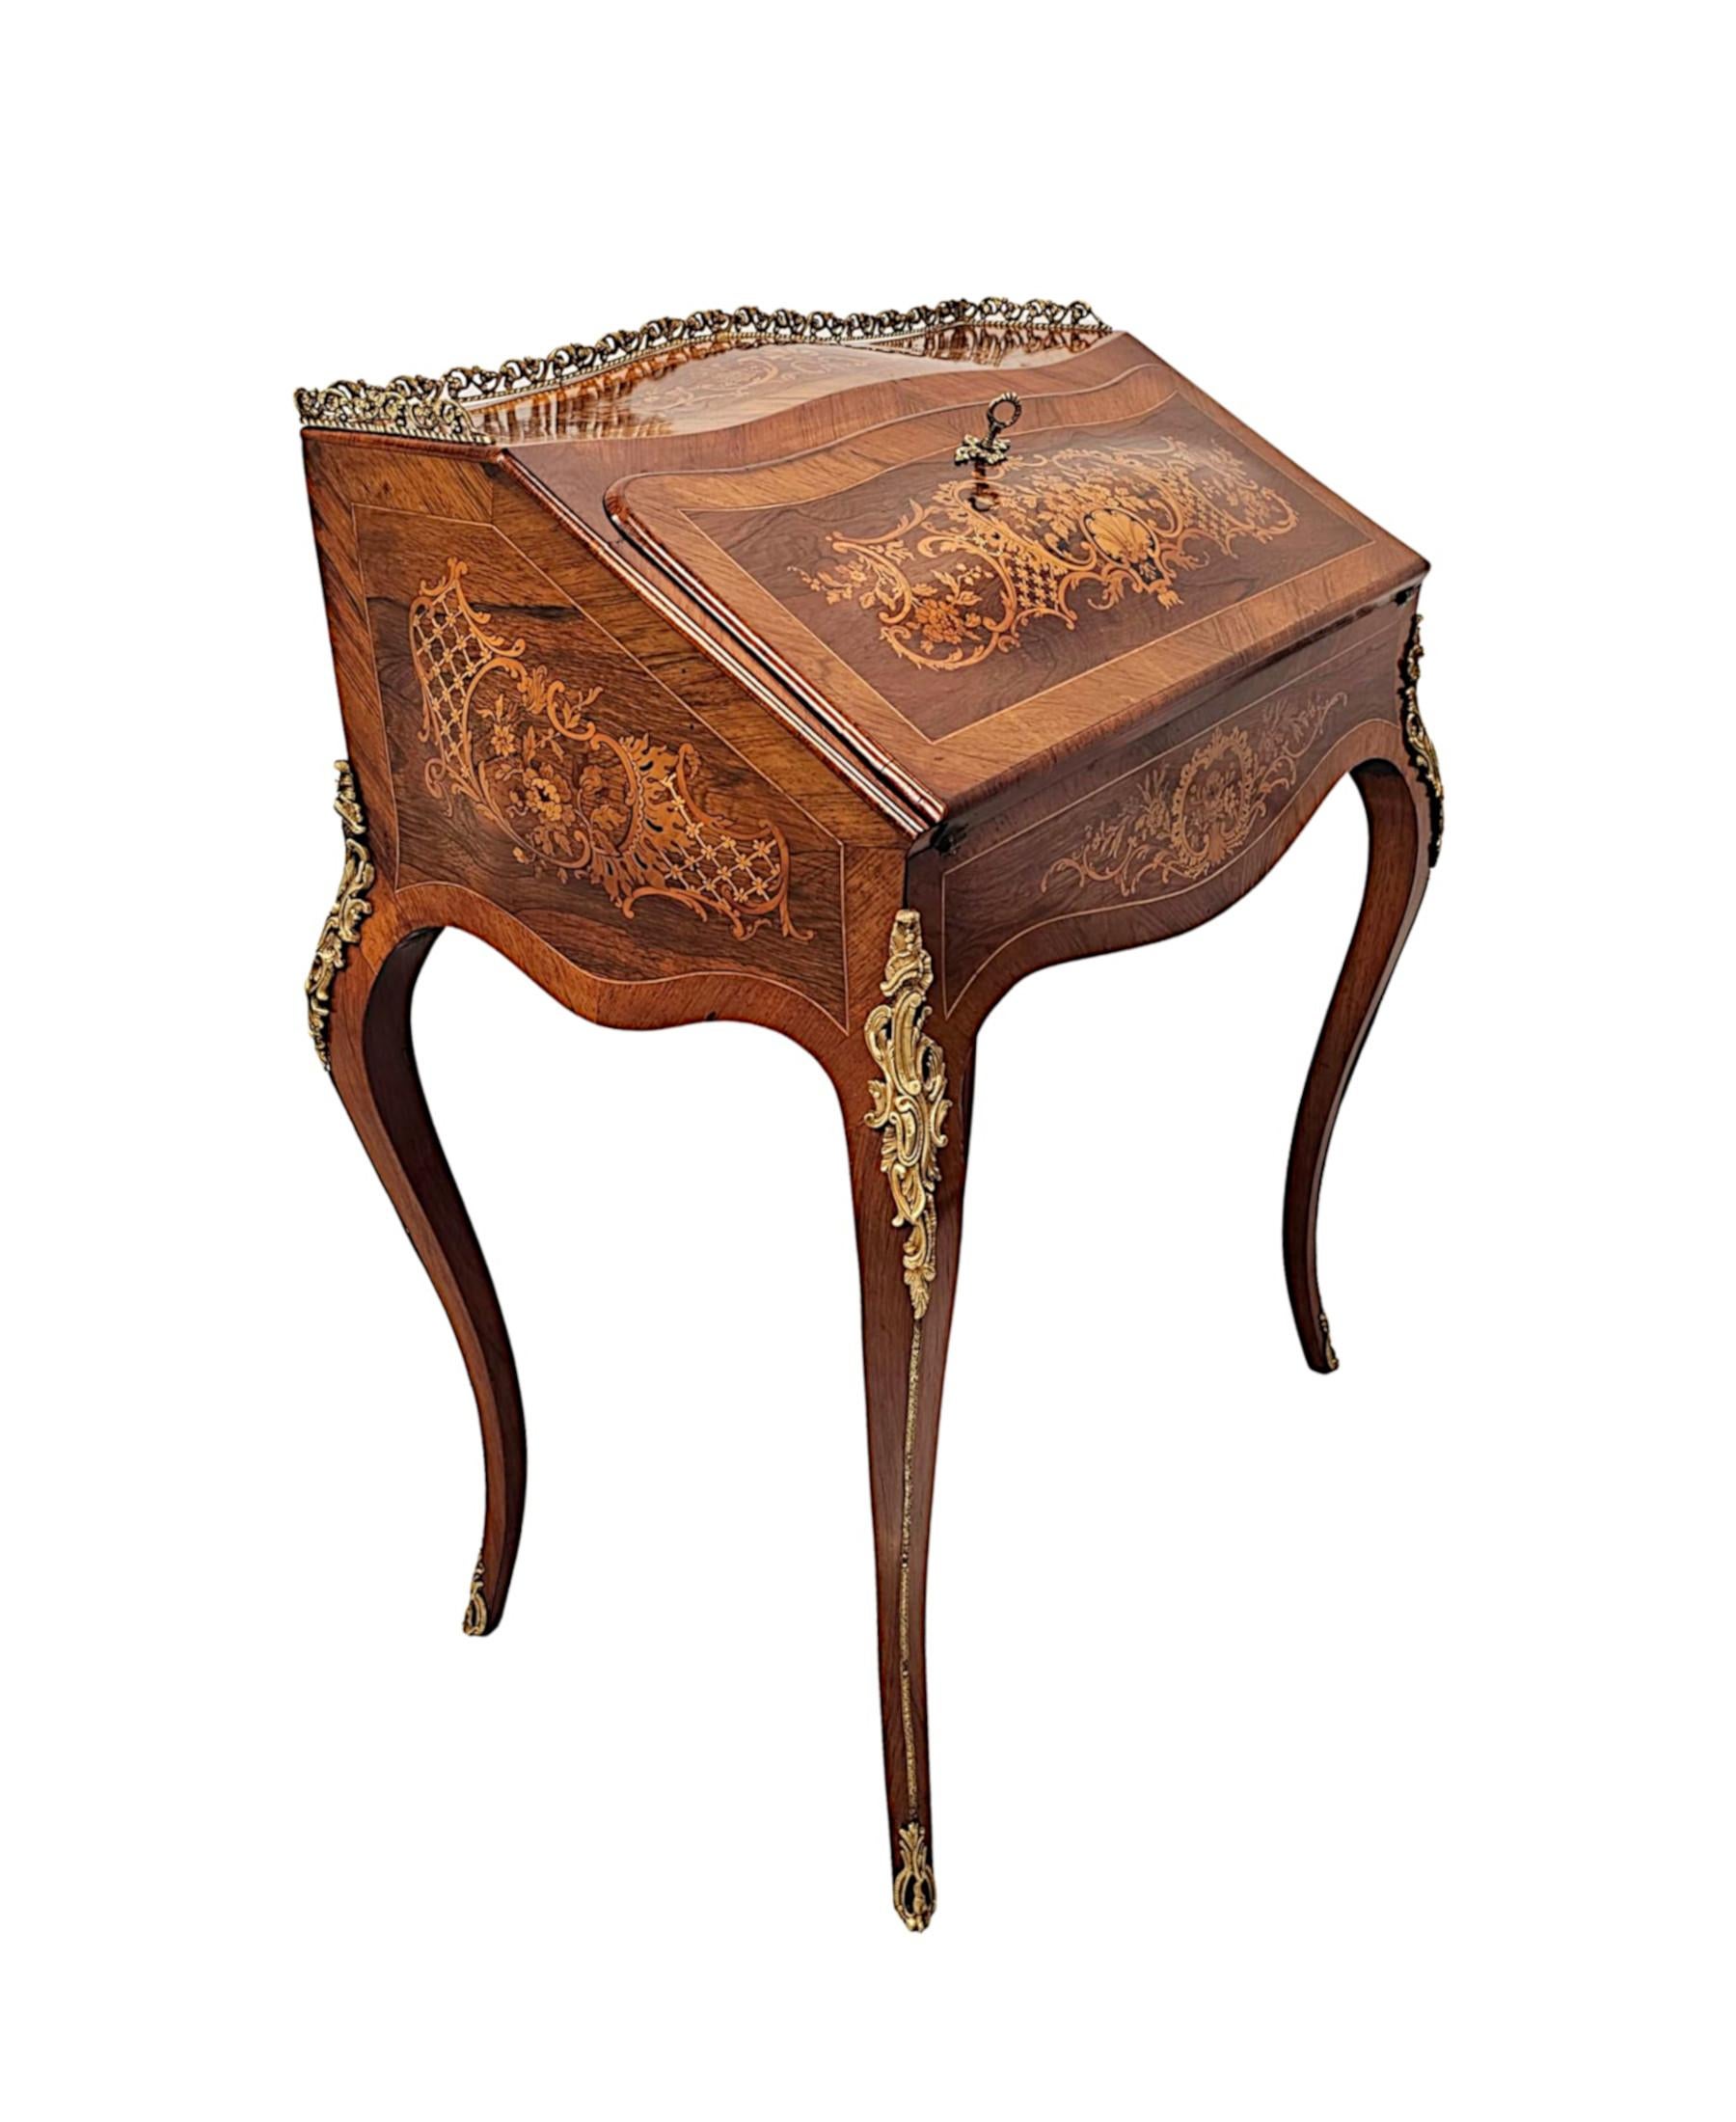 A very fine 19th Century richly patinated fruitwood Bureau Du Dame.  This gorgeous writing desk is of exceptional quality, stunningly hand carved, line inlaid, ormolu mounted and with marquetry panels depicting intricate motifs of shells, flower